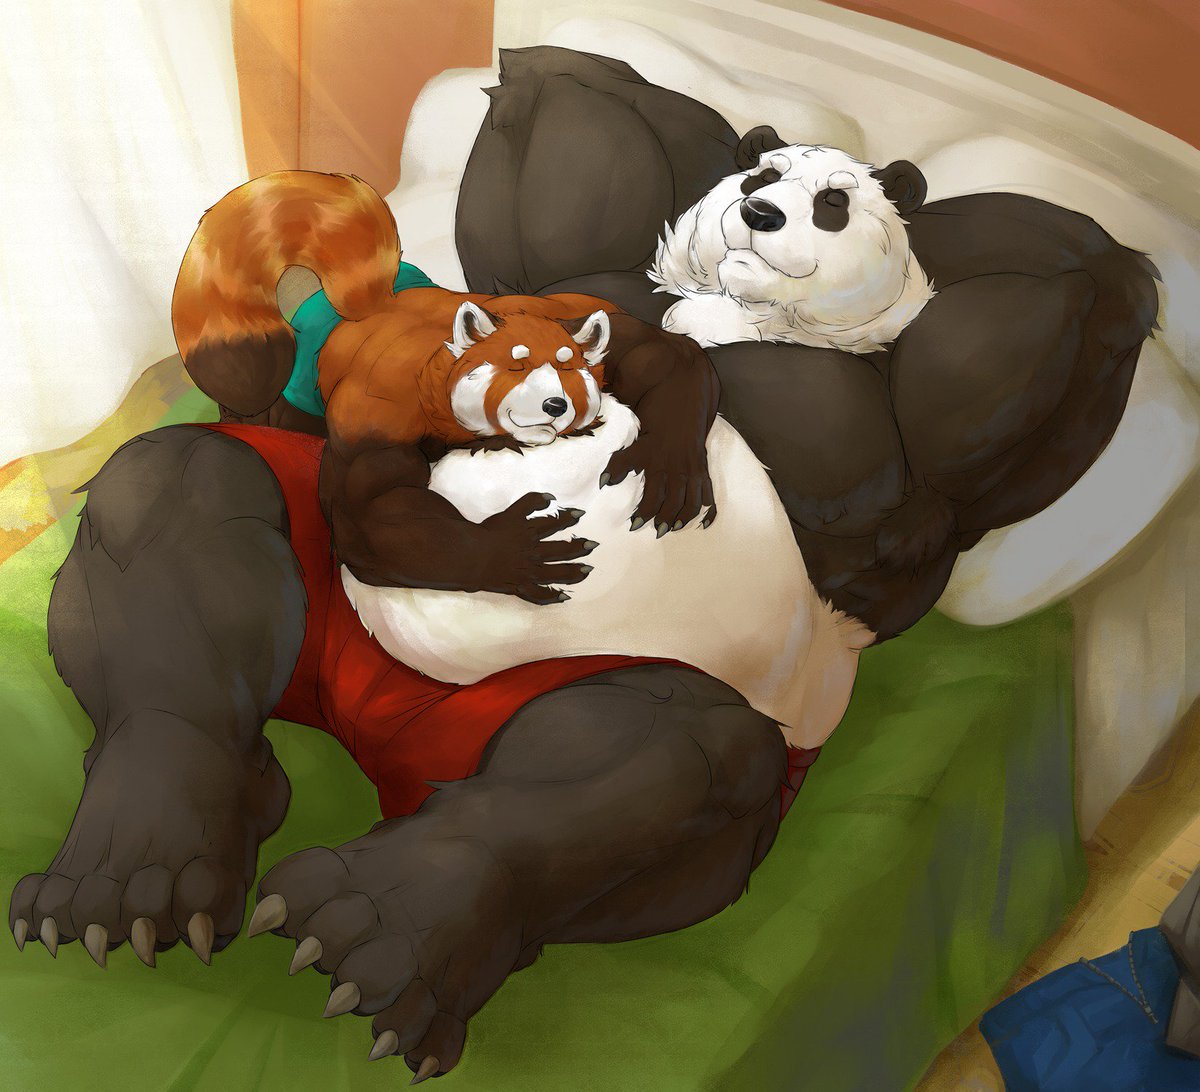 A giant panda’s pudgy belly makes a good pillow/ bed and the red panda seem...